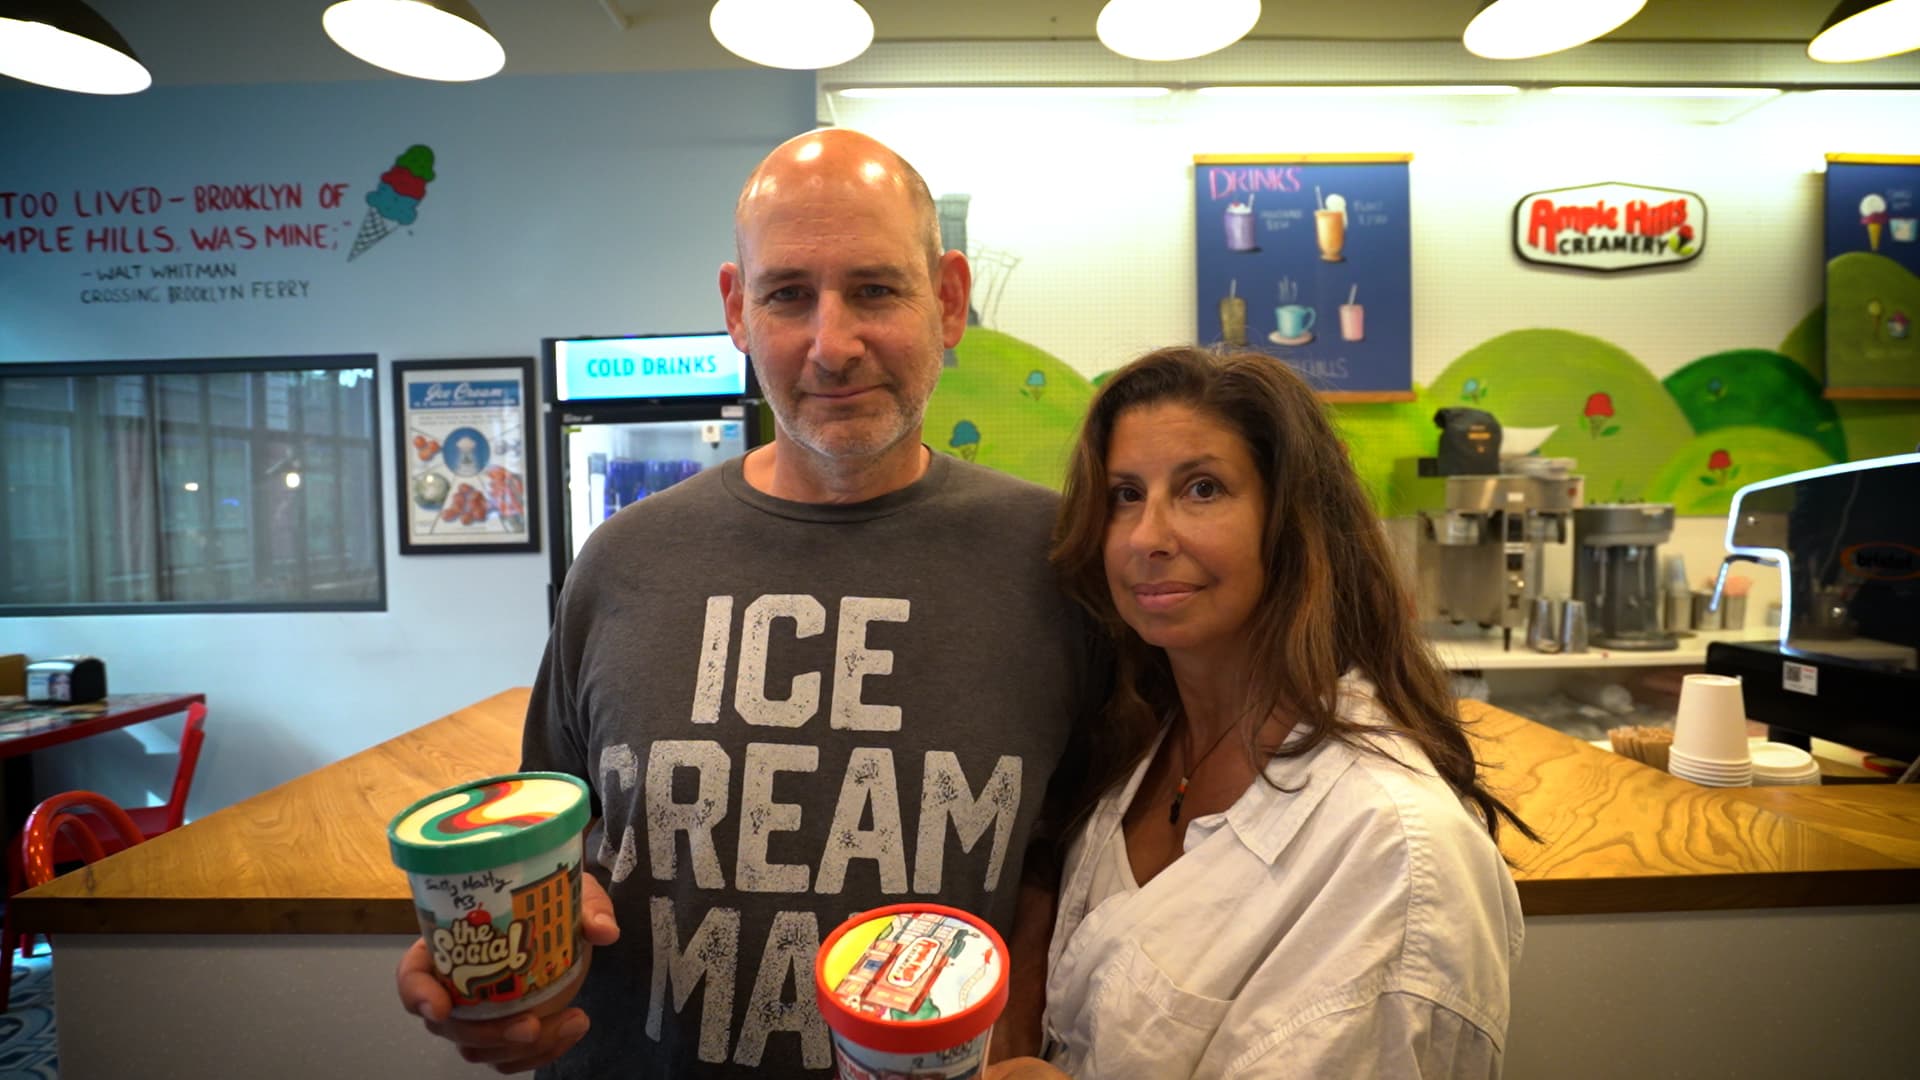 Couple lost $40M ice cream company—how they’re rebuilding